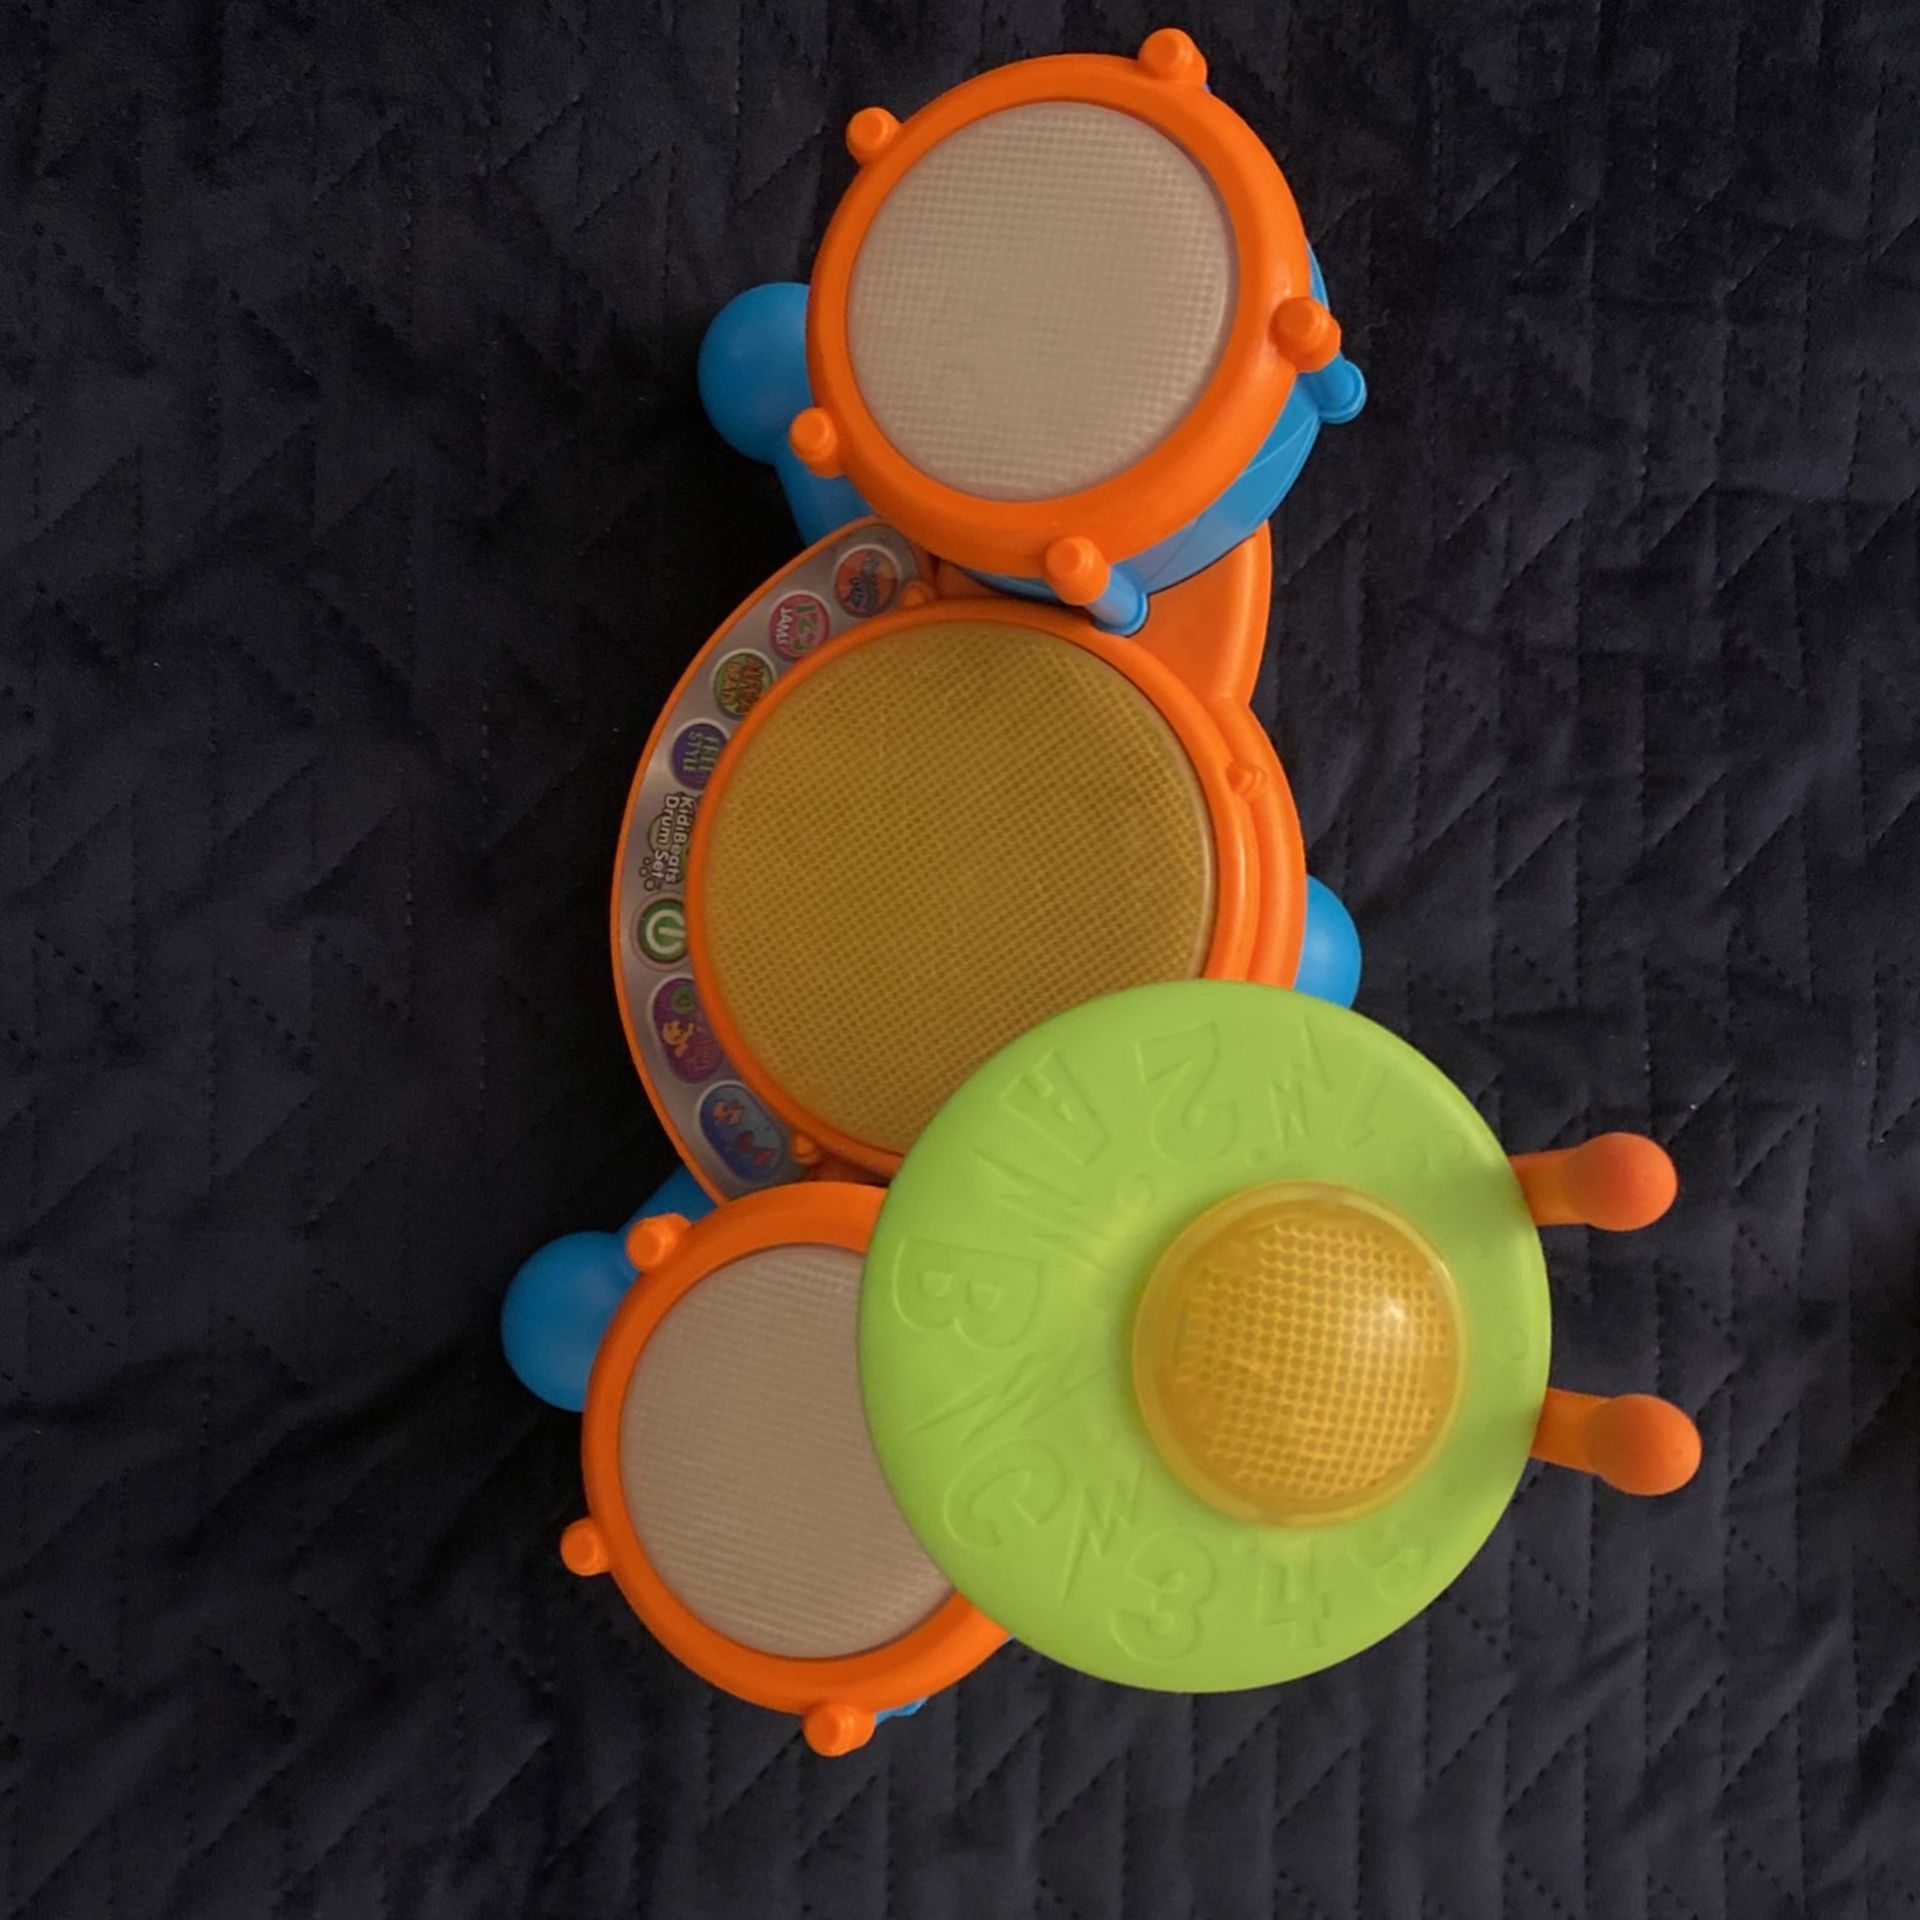 Electronica drum set toy